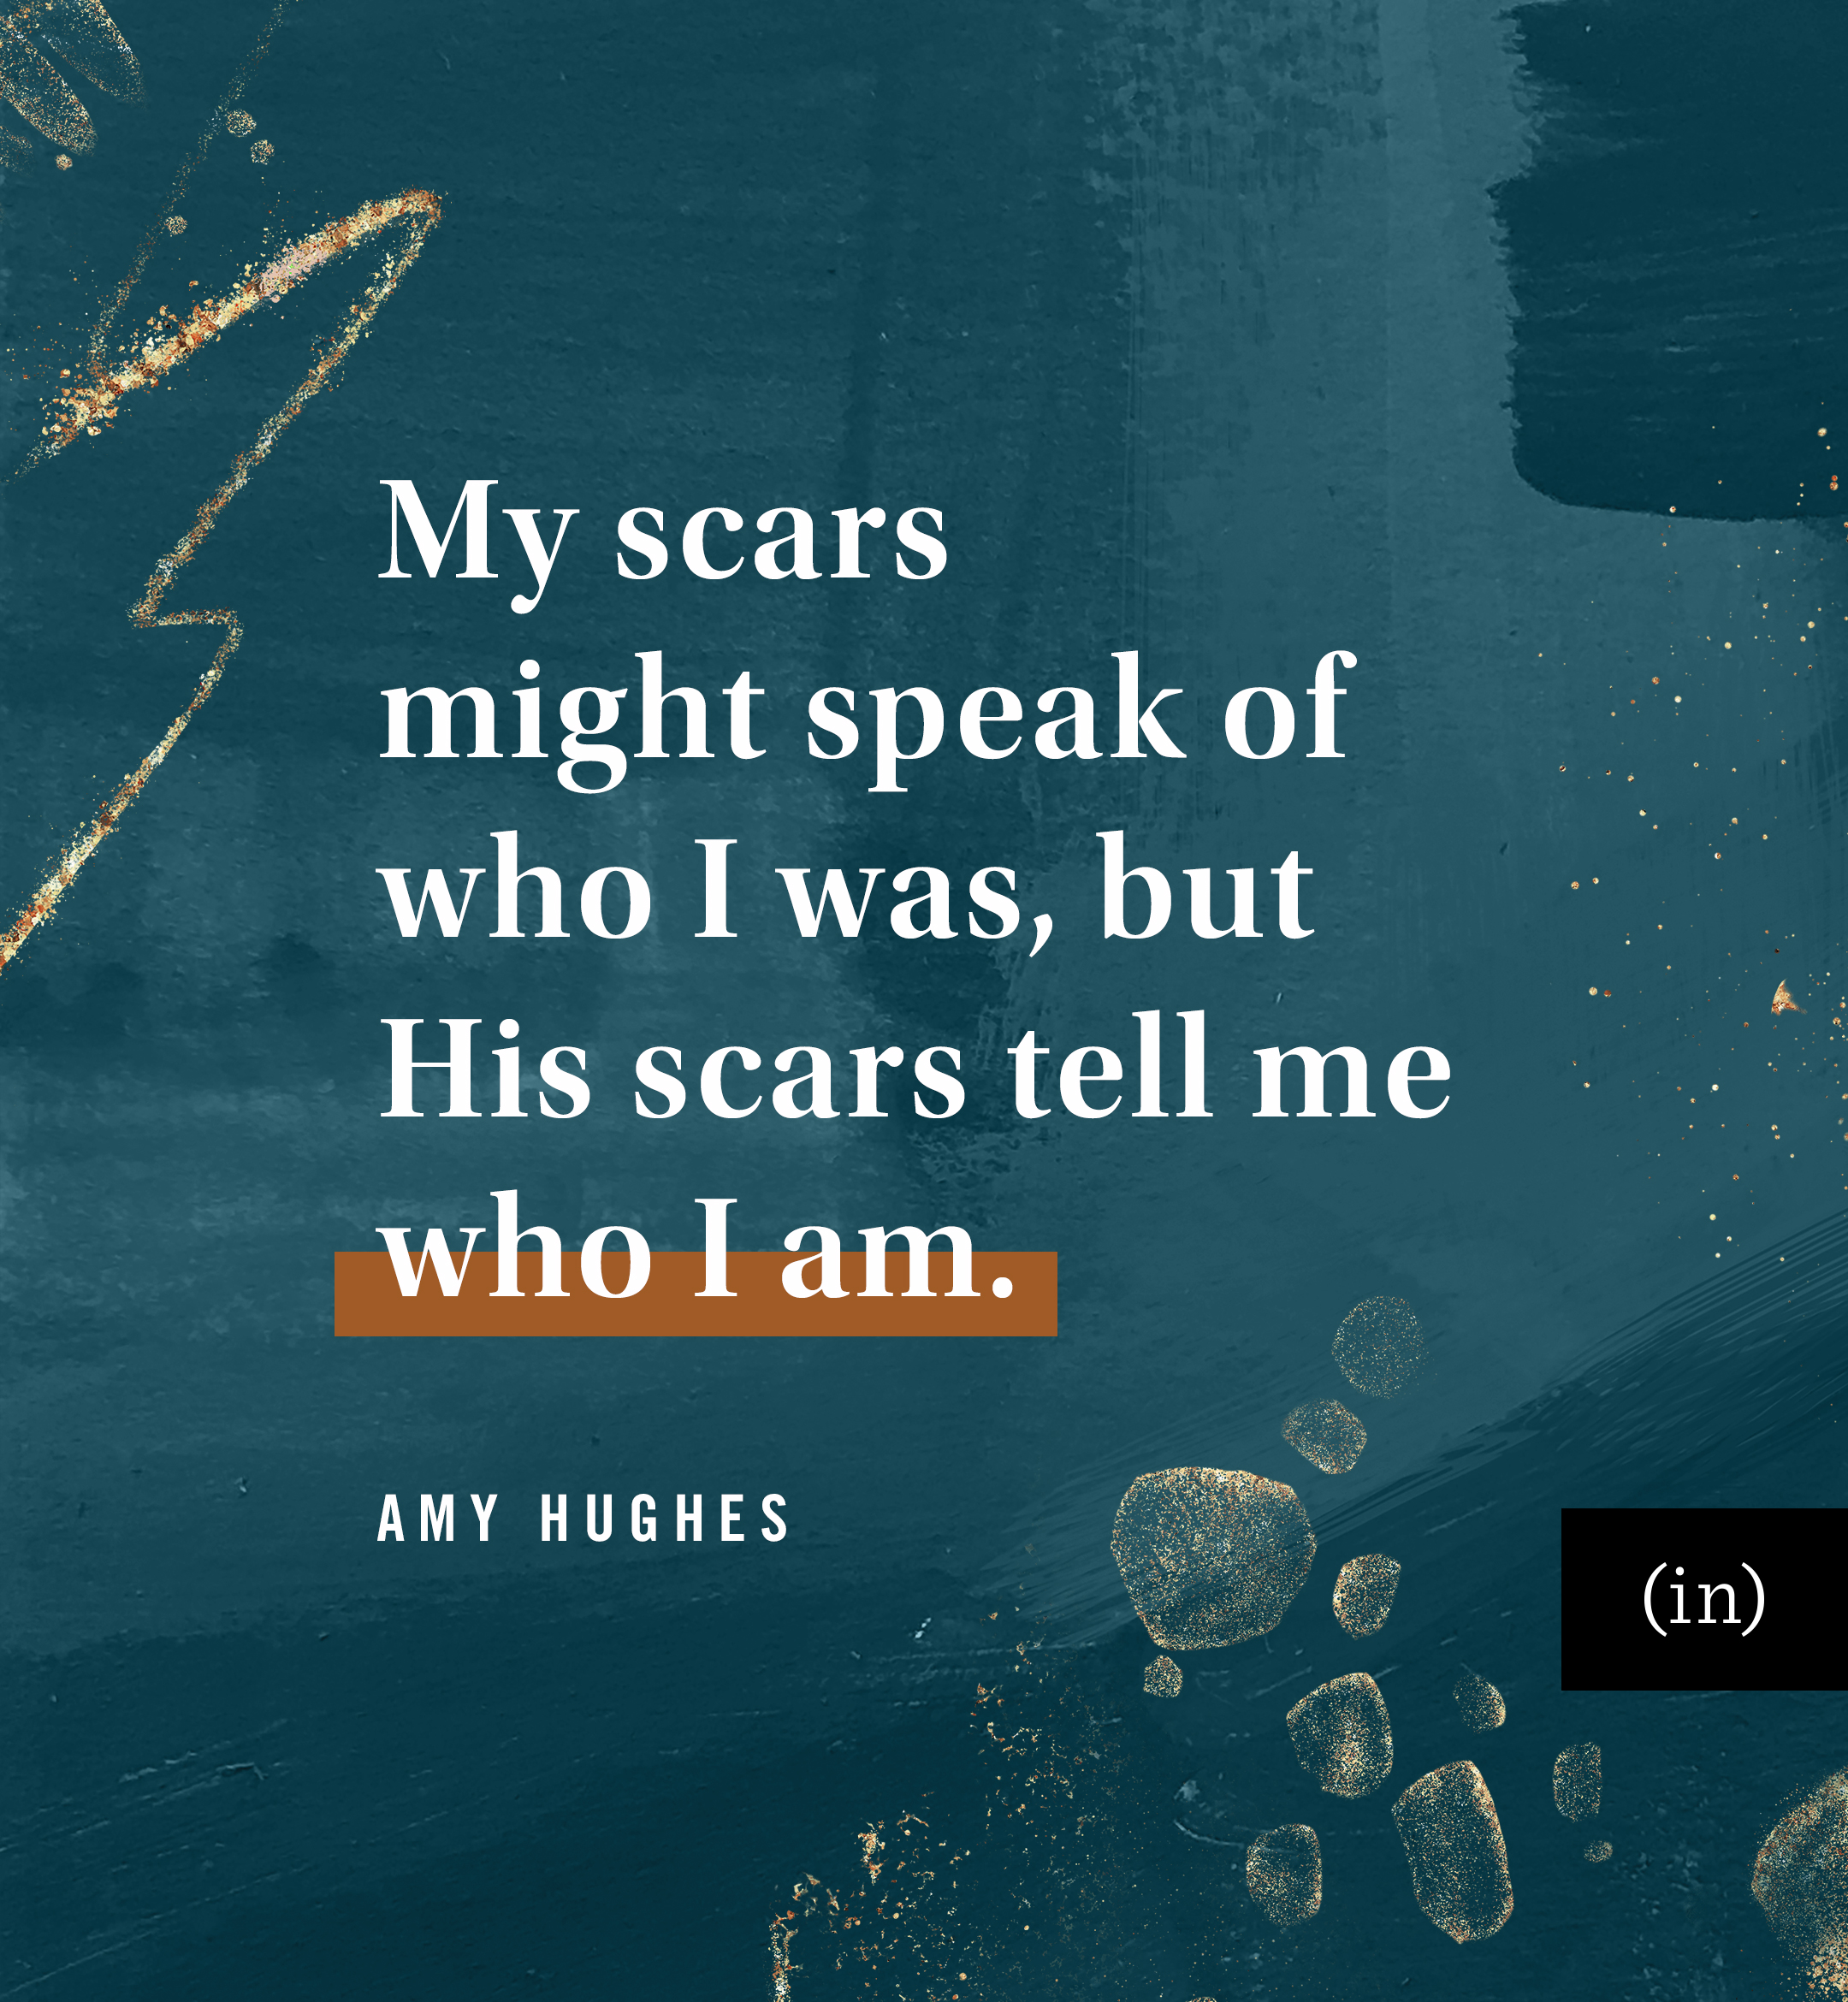 My scars might speak of who I was, but His scars tell me who I am. -Amy Hughes